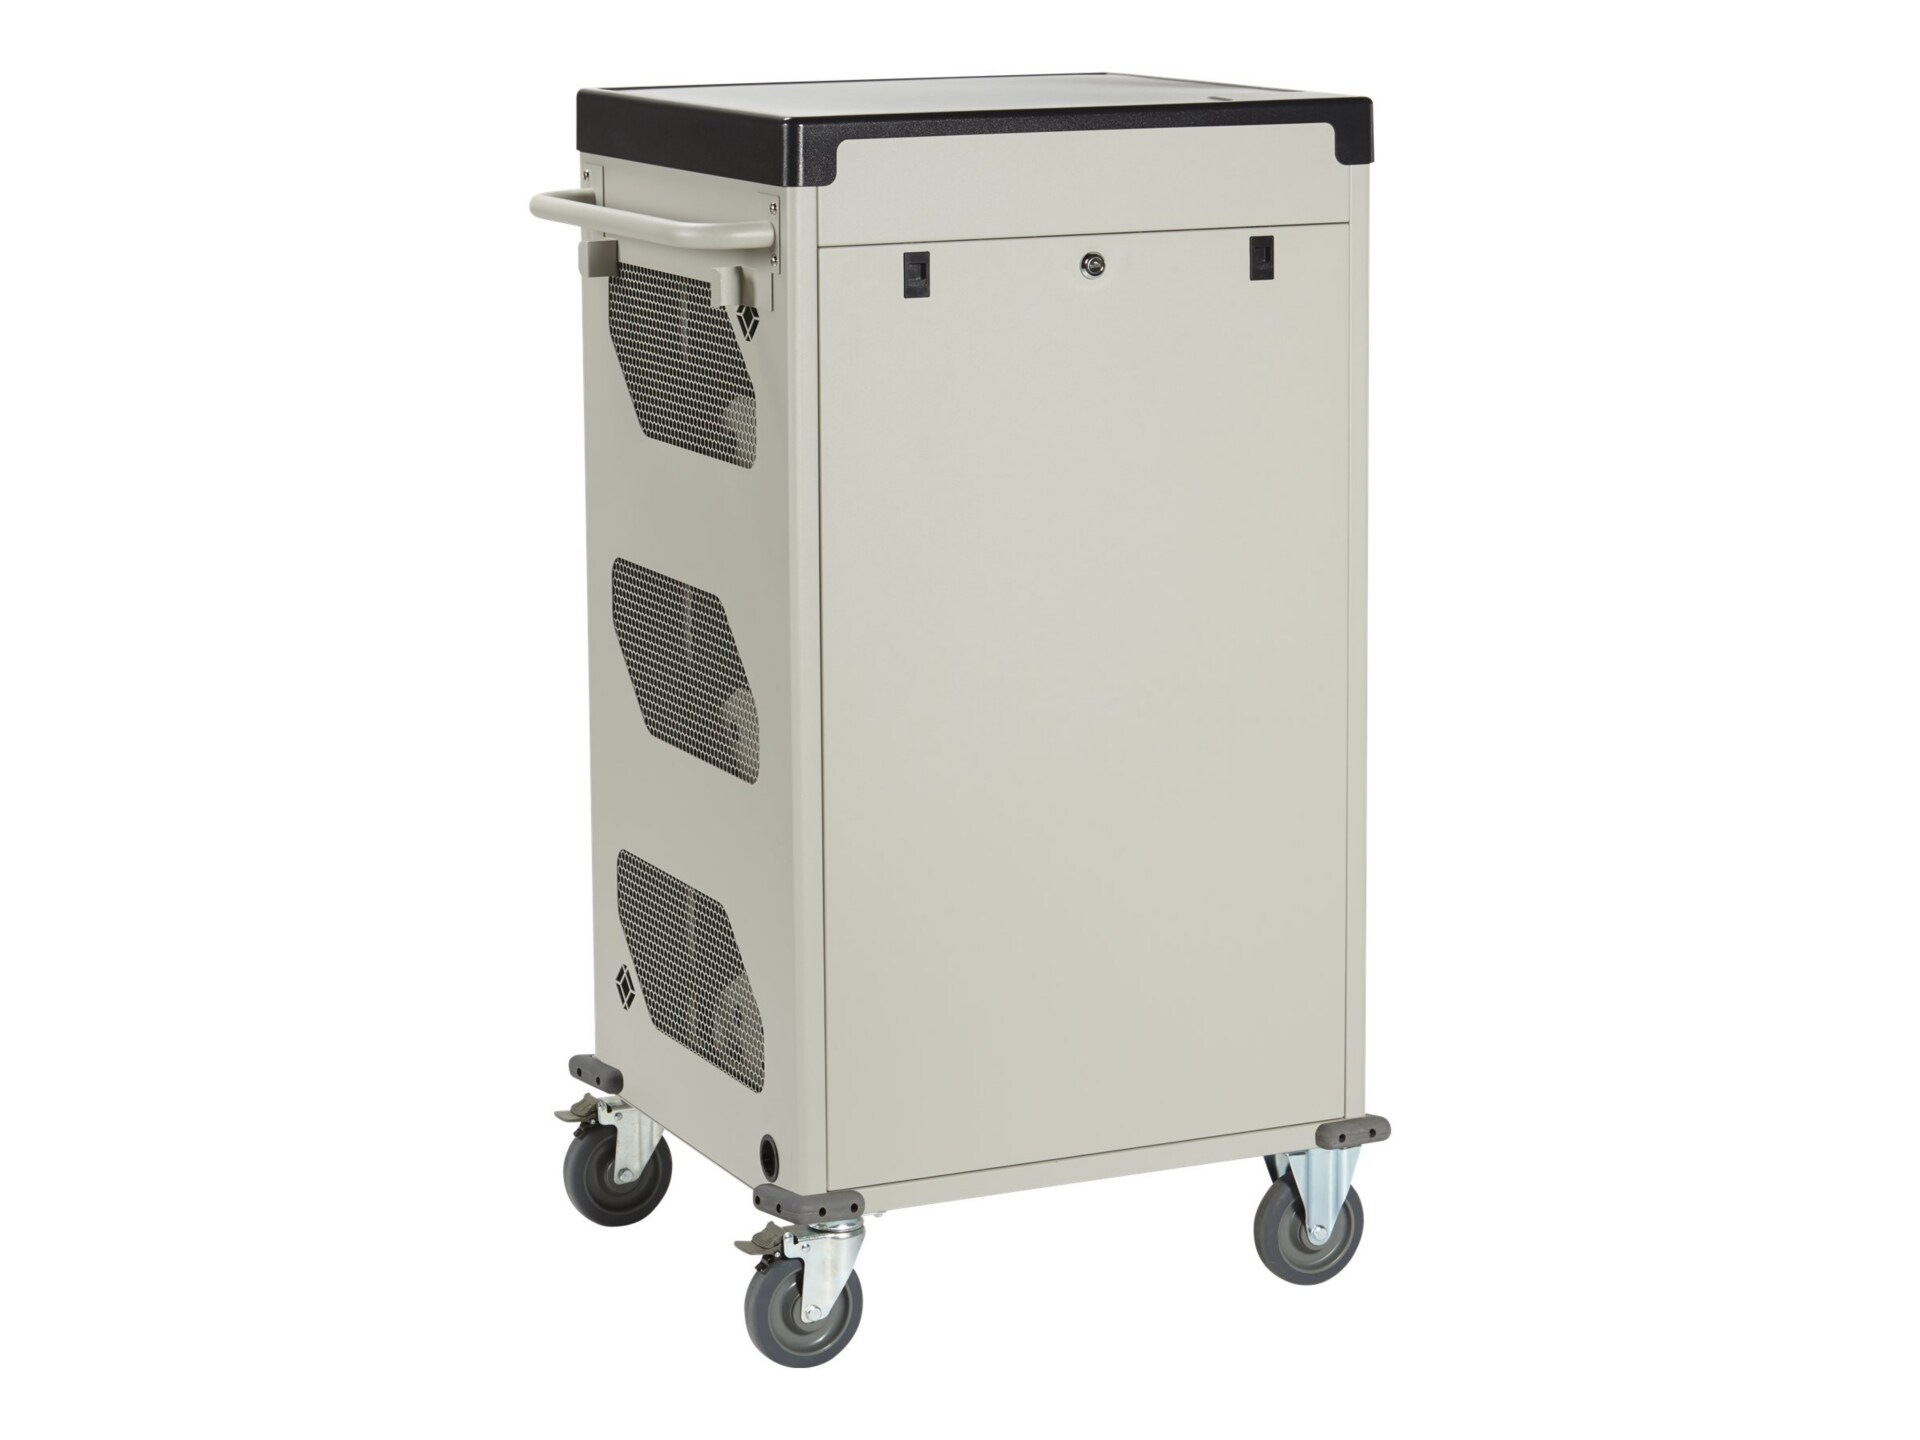 Black Box Deluxe Syncing Cart - cart